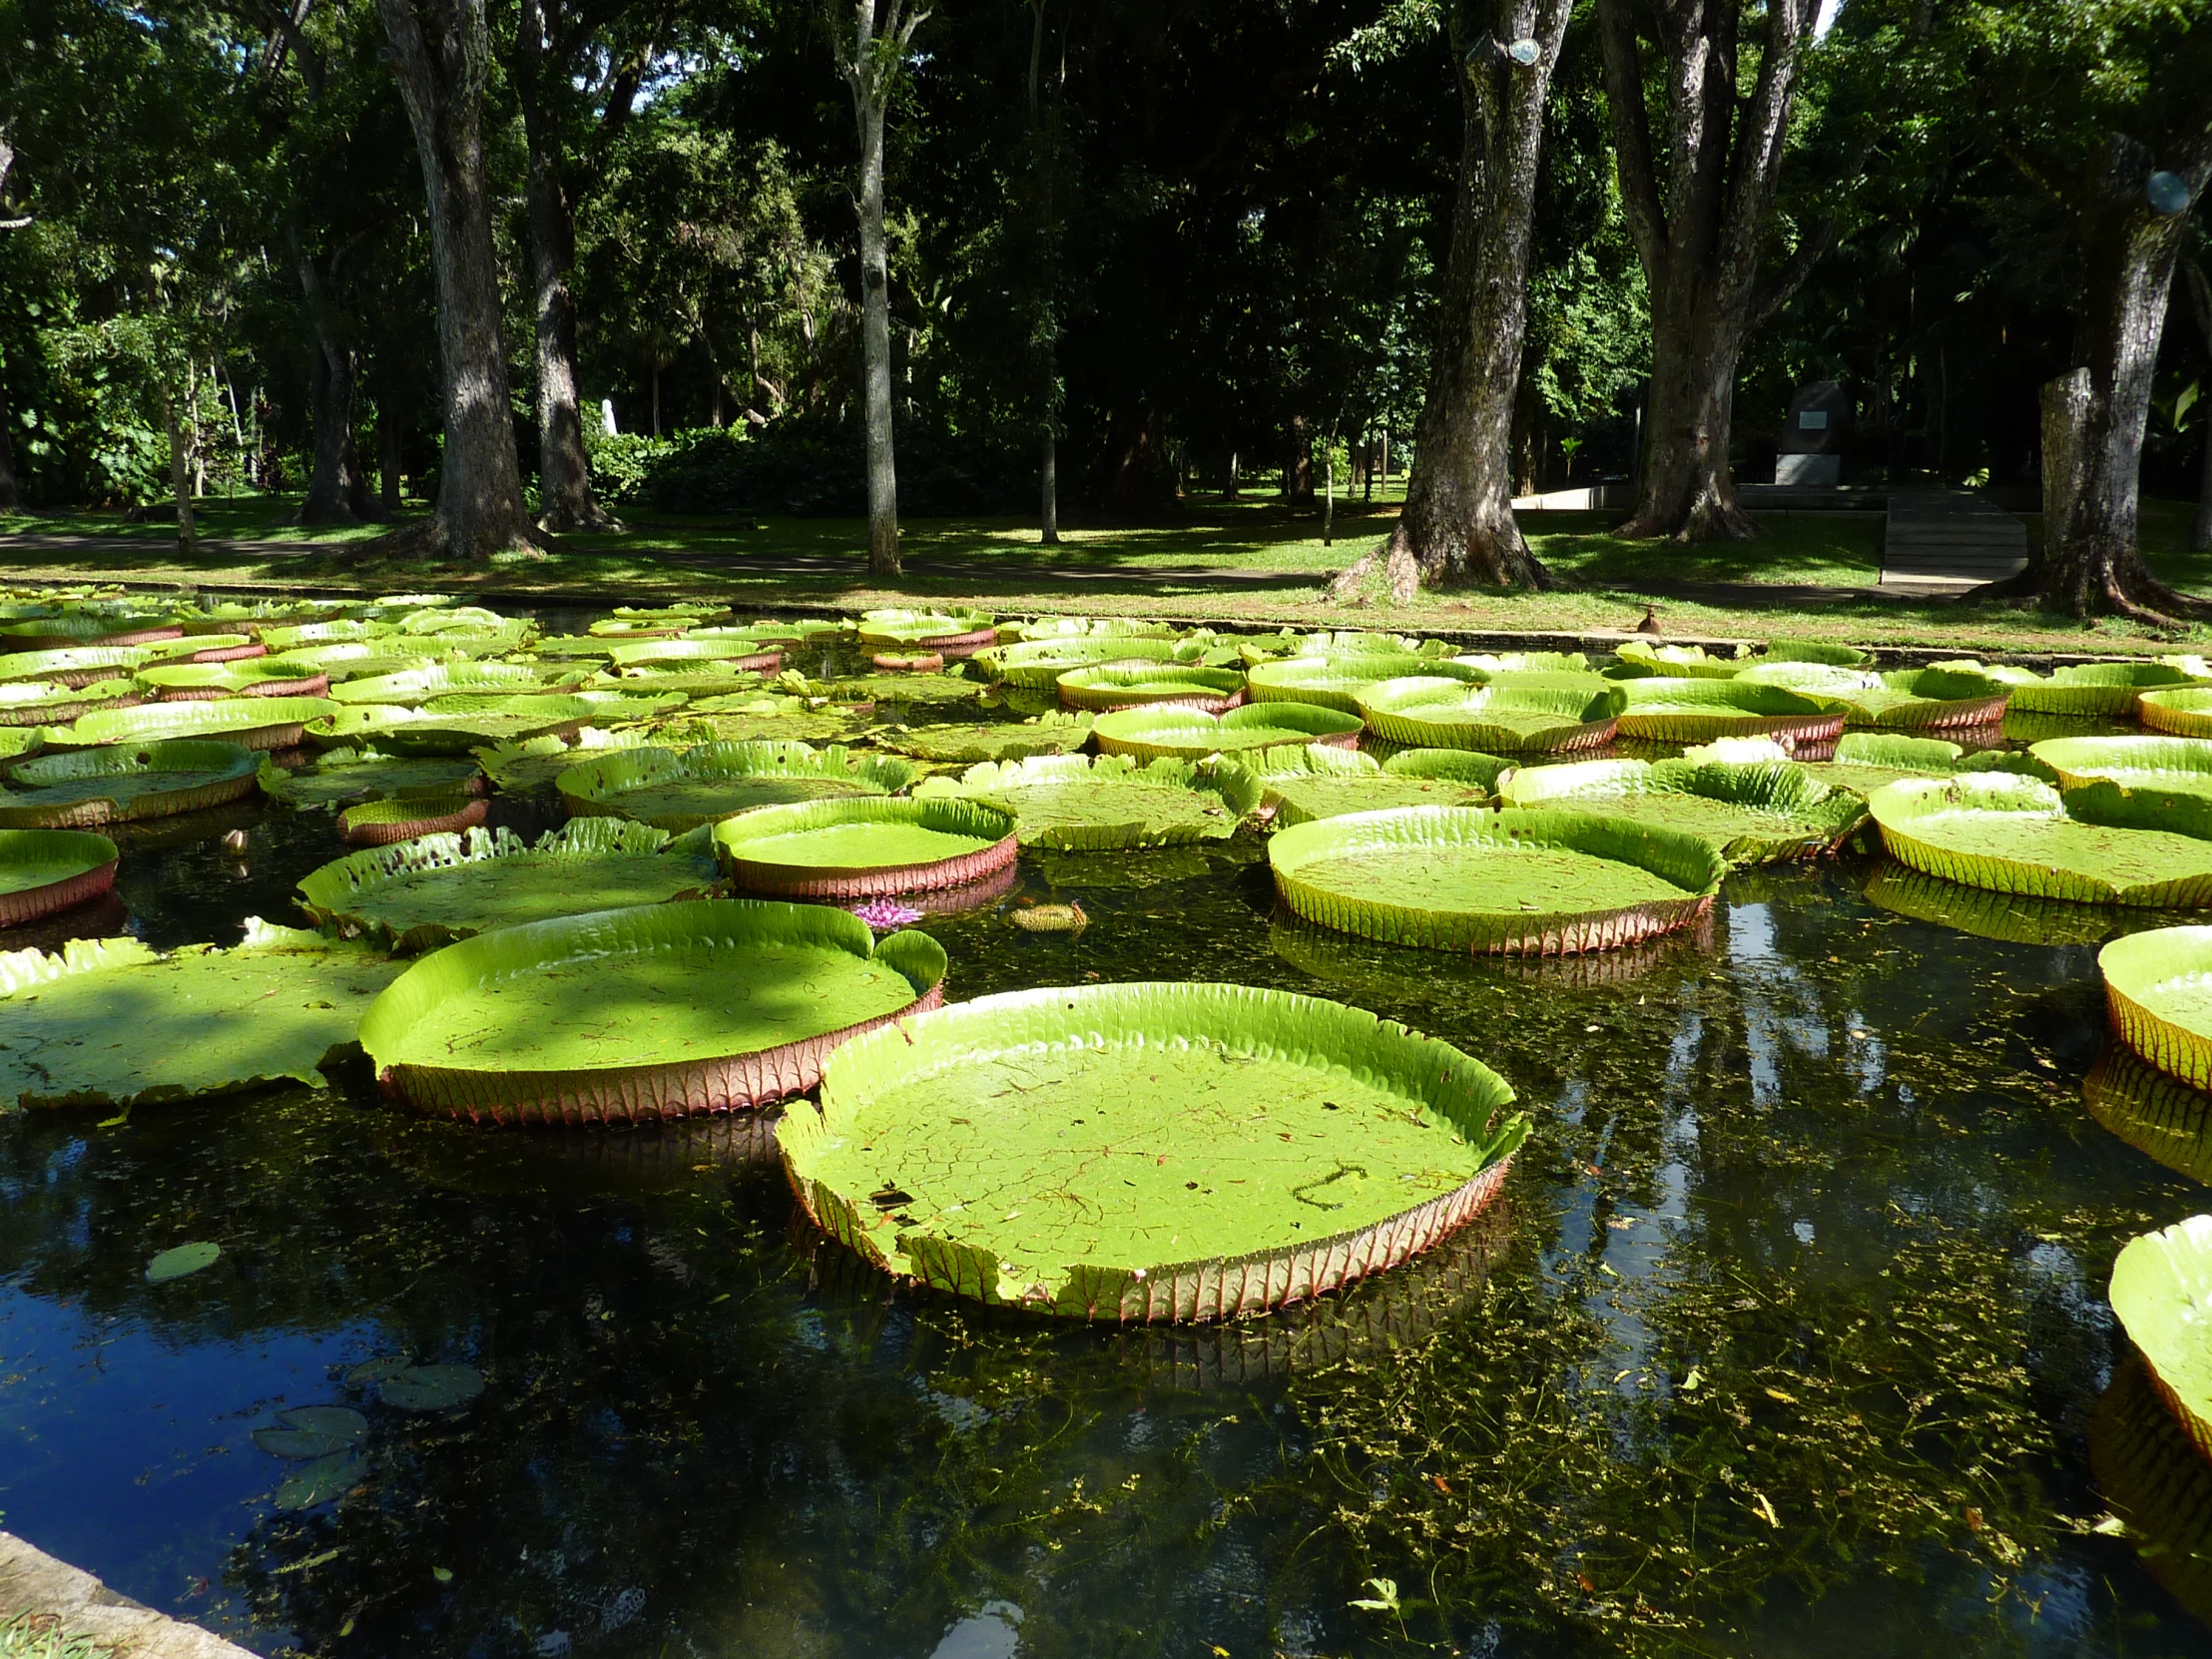 lily pads float on water in the sun